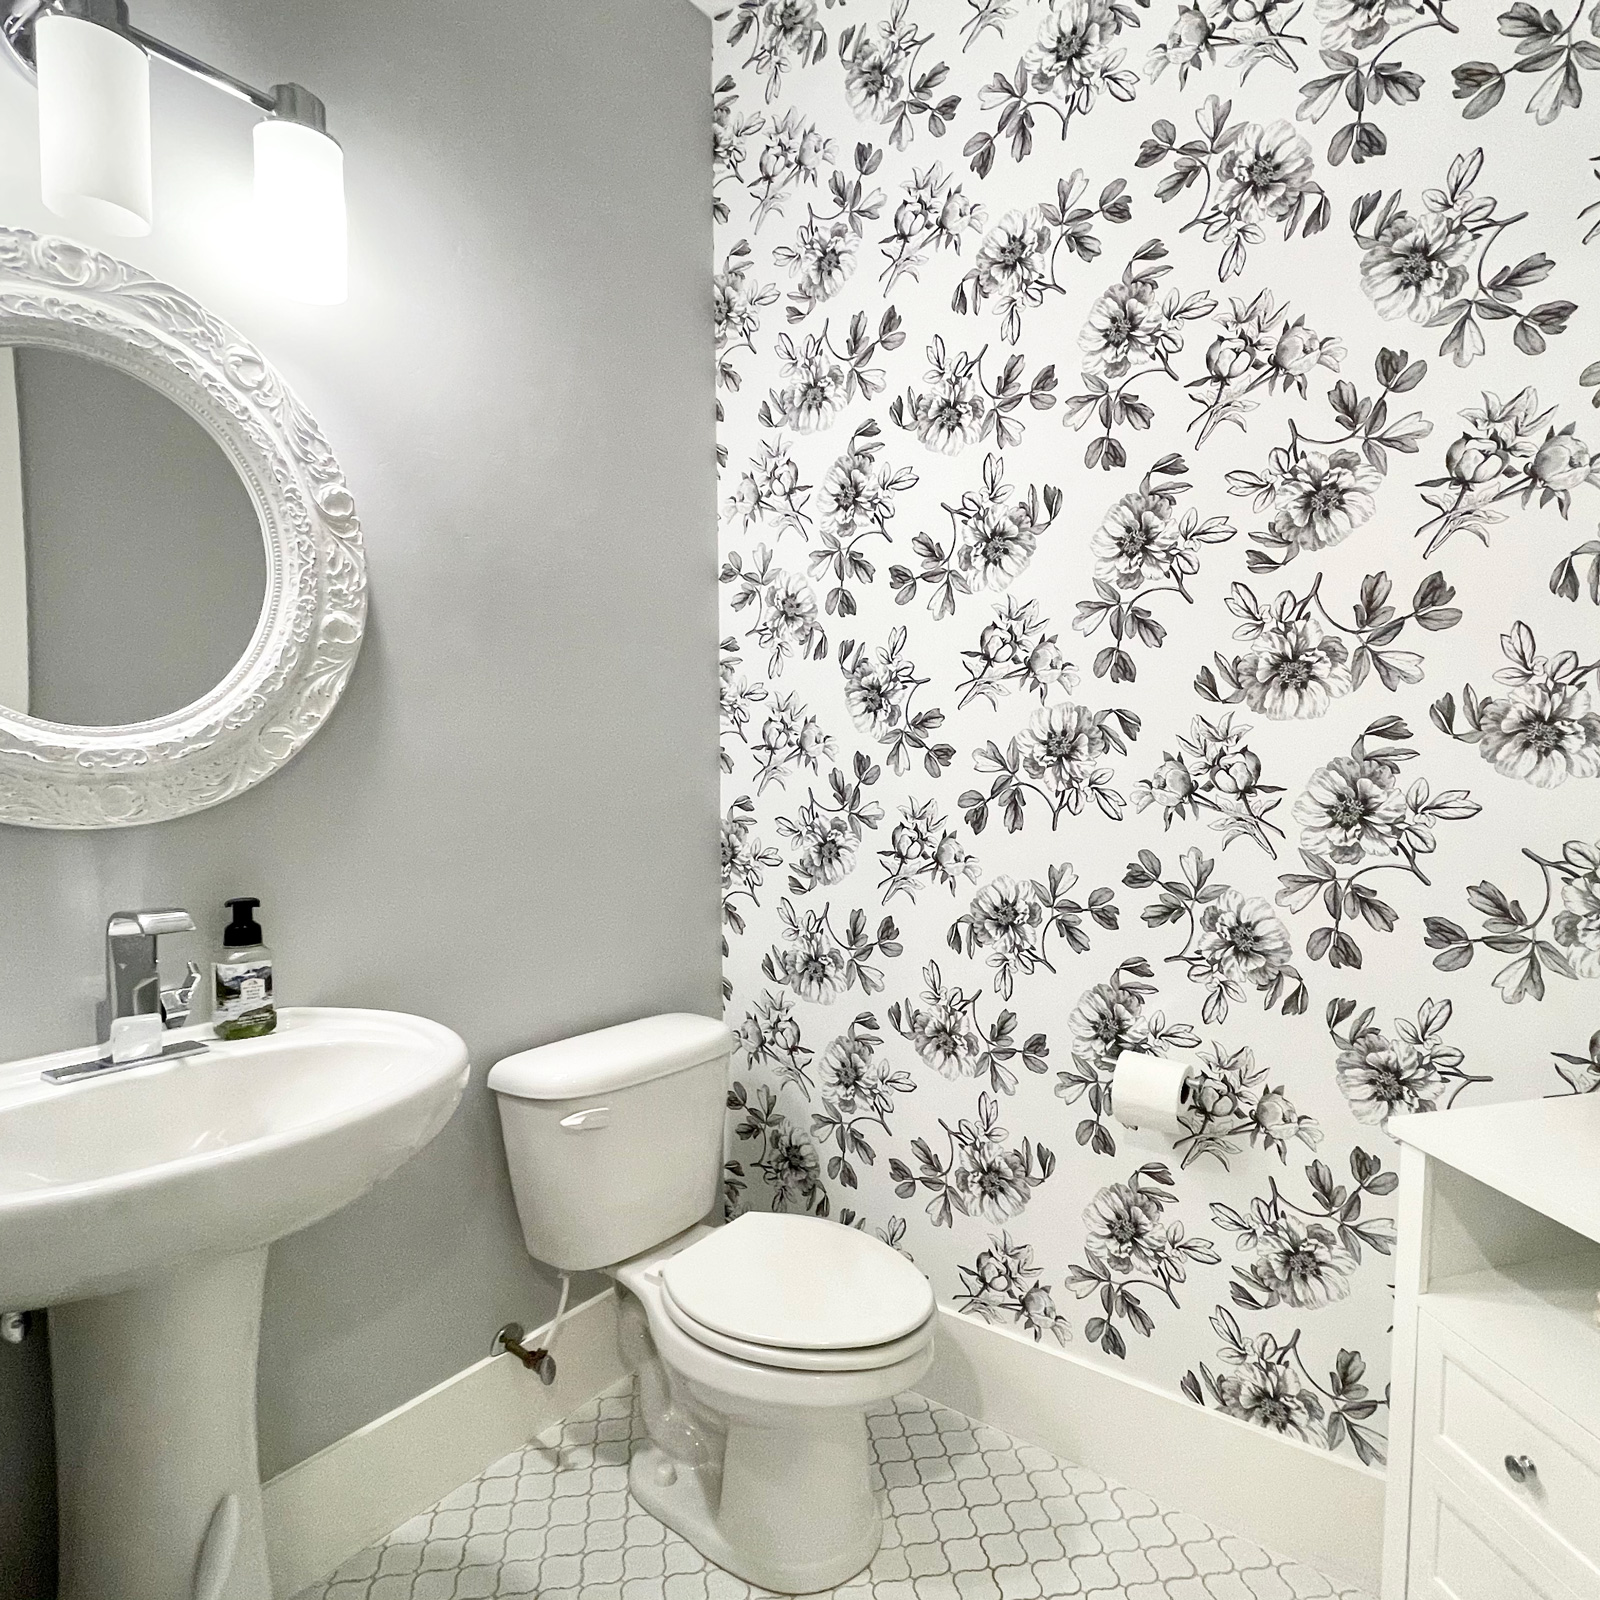 Modern bathroom with floral wallpaper and white fixtures.